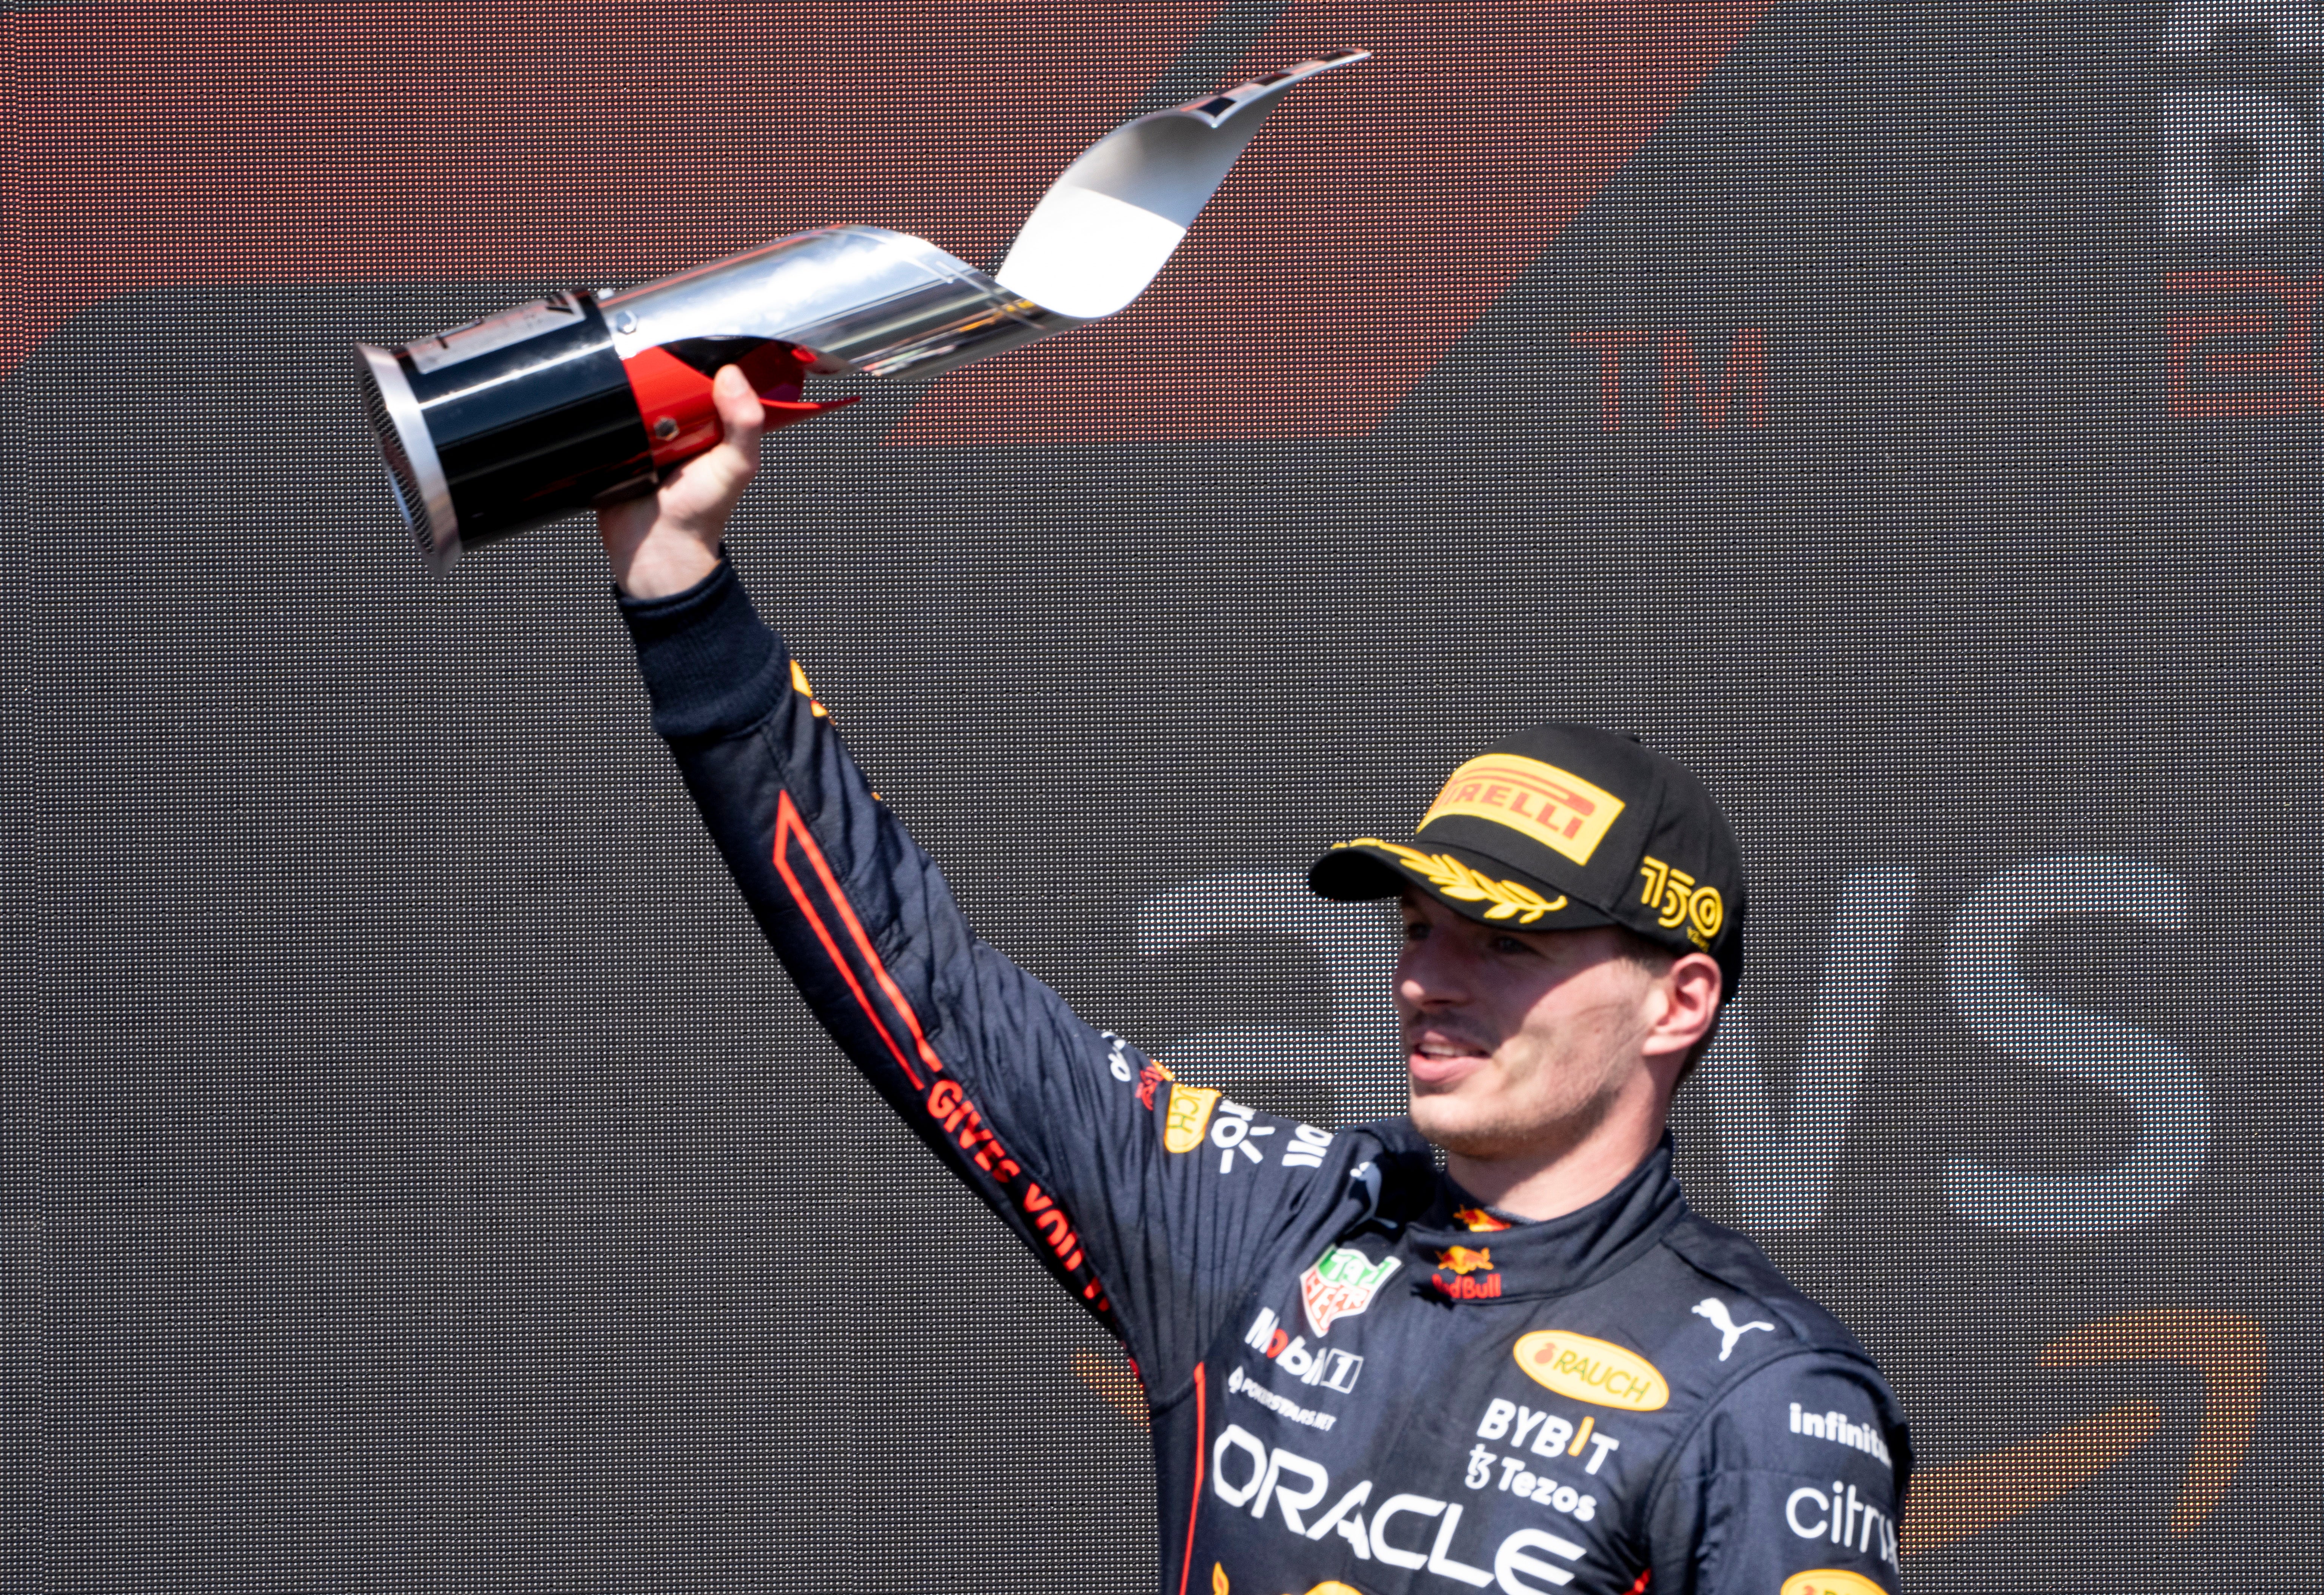 Max Verstappen claimed victory in the Canadian Grand Prix (Paul Chiasson/AP)